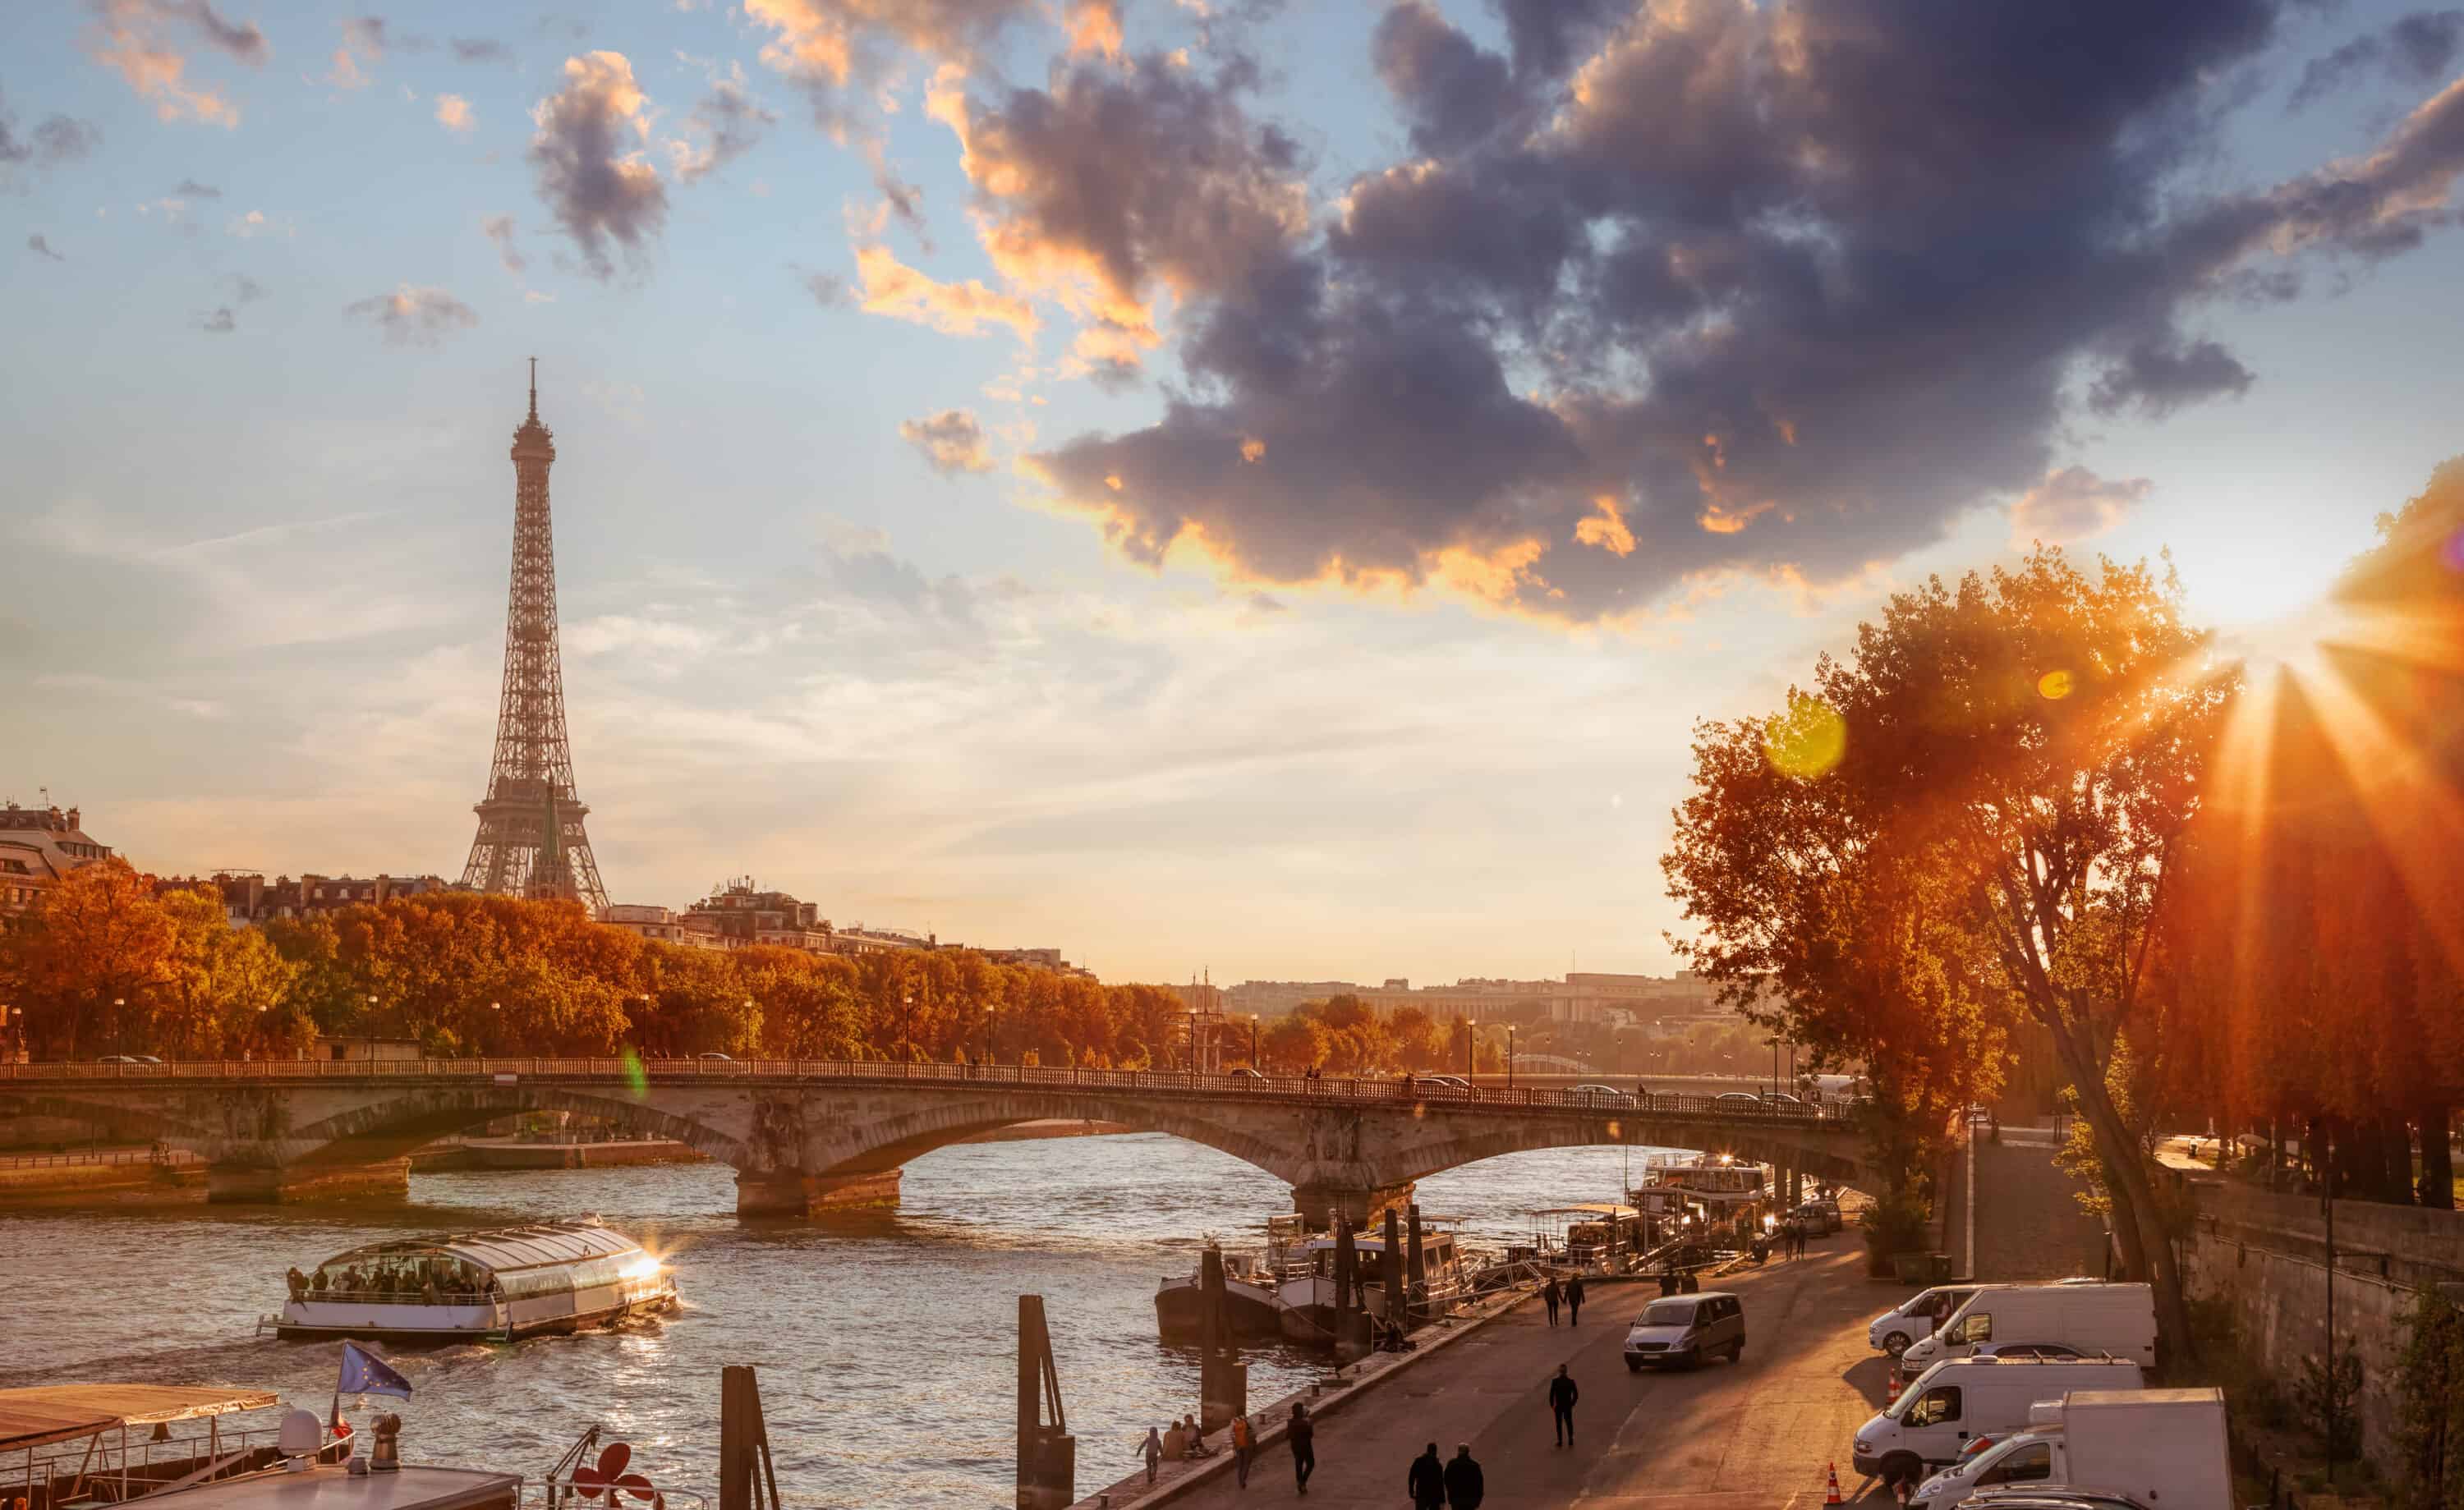 The Eiffel Tower and the Seine River in Paris.